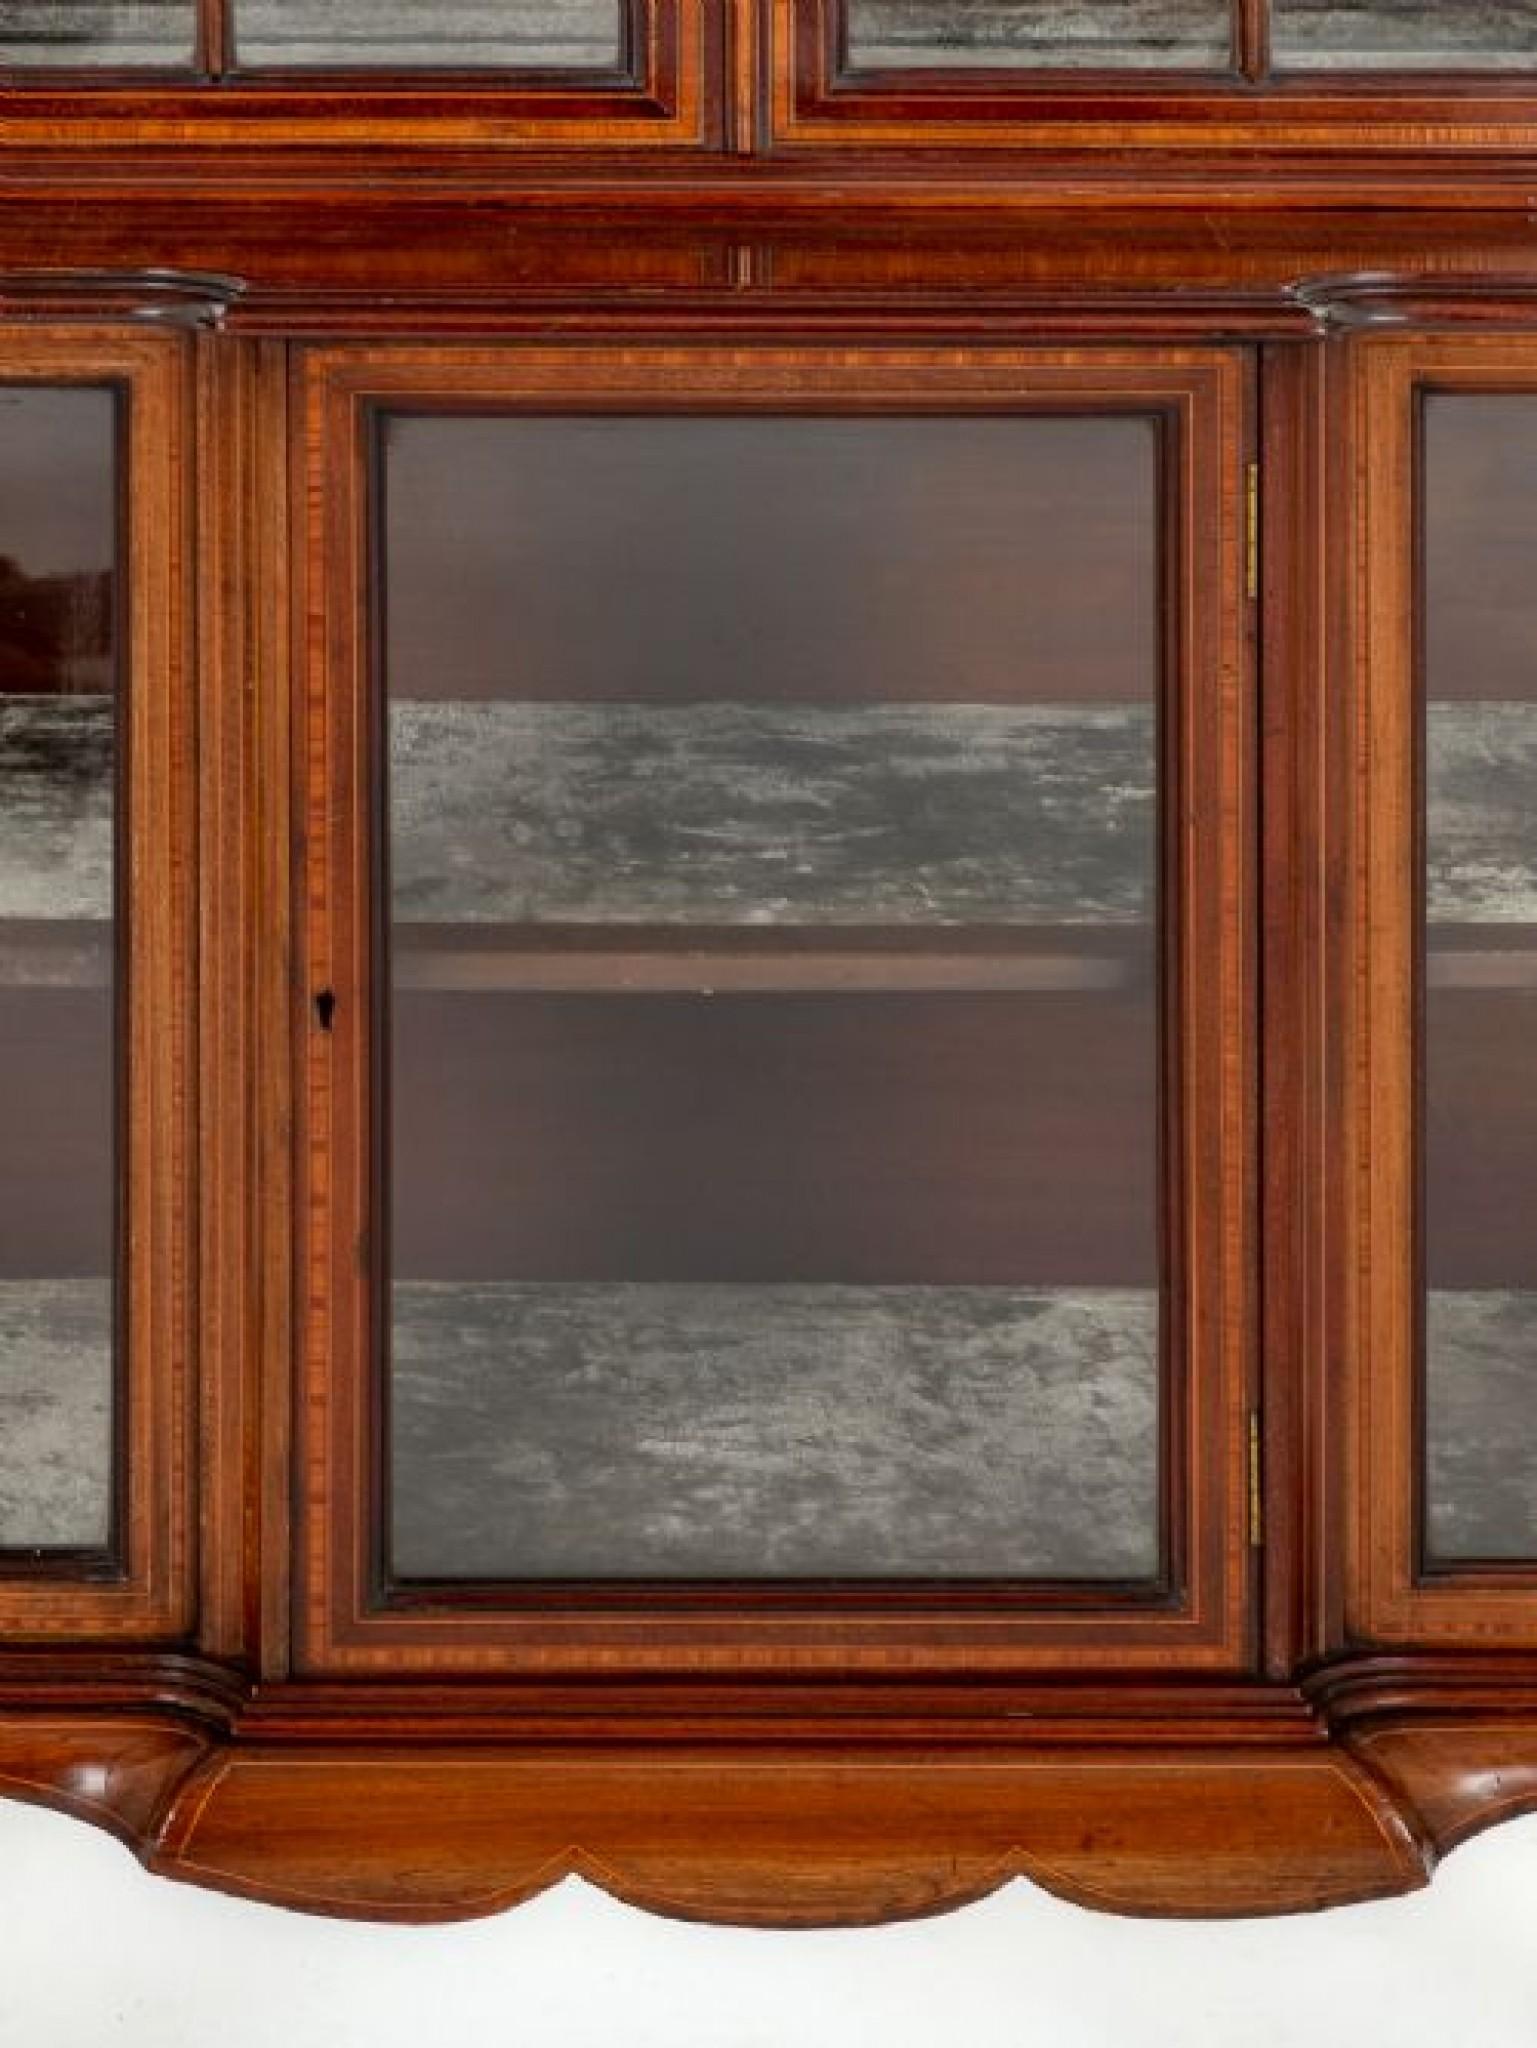 Late 19th Century Sheraton Display Cabinet Mahogany Revival 1890 For Sale